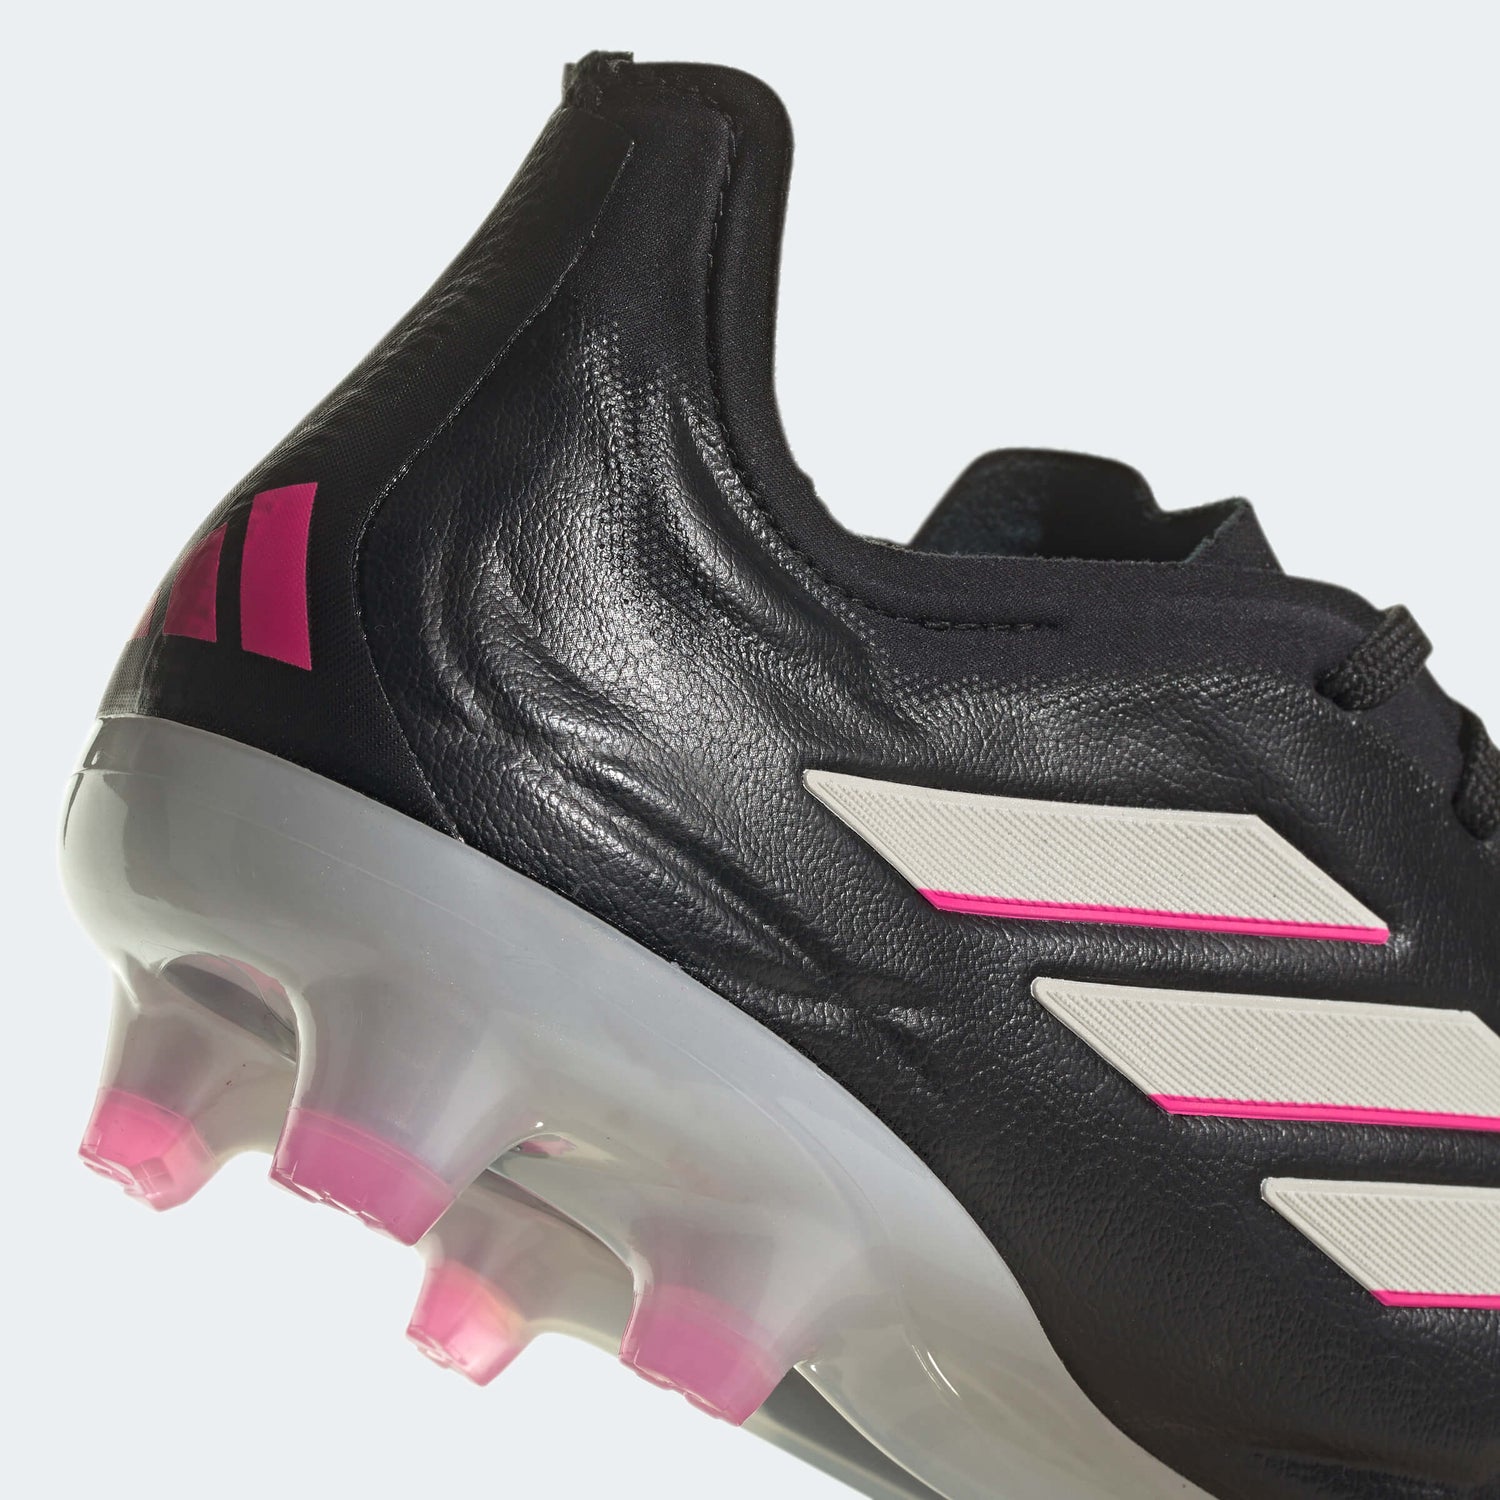 adidas Copa Pure.1 FG - Own Your Football Pack (SP23) (Detail 1)